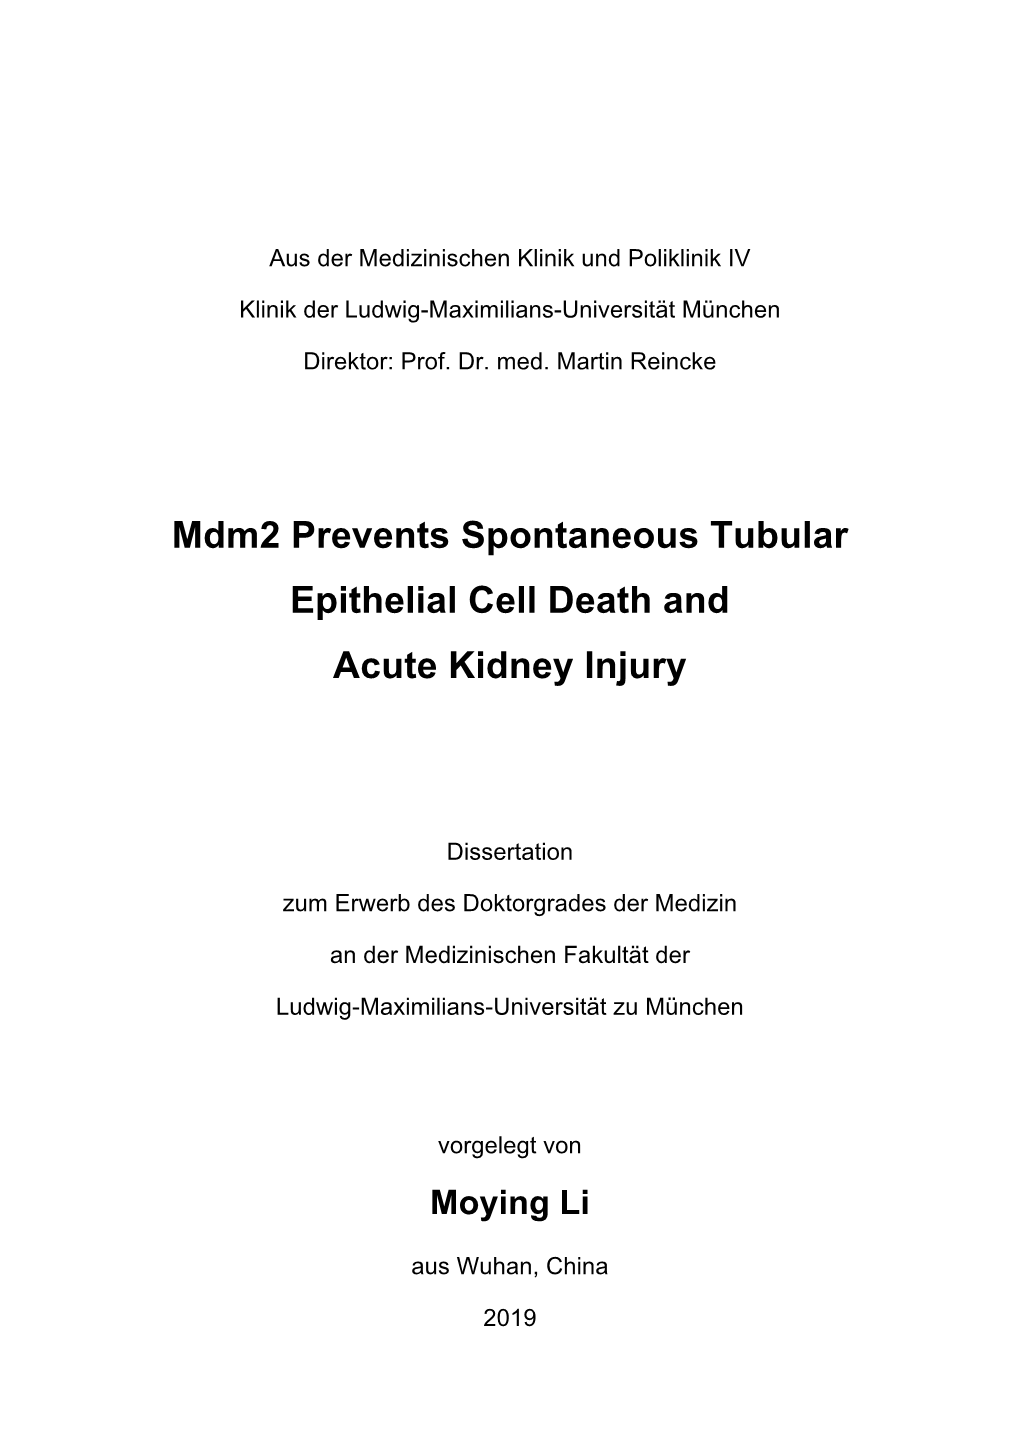 Mdm2 Prevents Spontaneous Tubular Epithelial Cell Death and Acute Kidney Injury